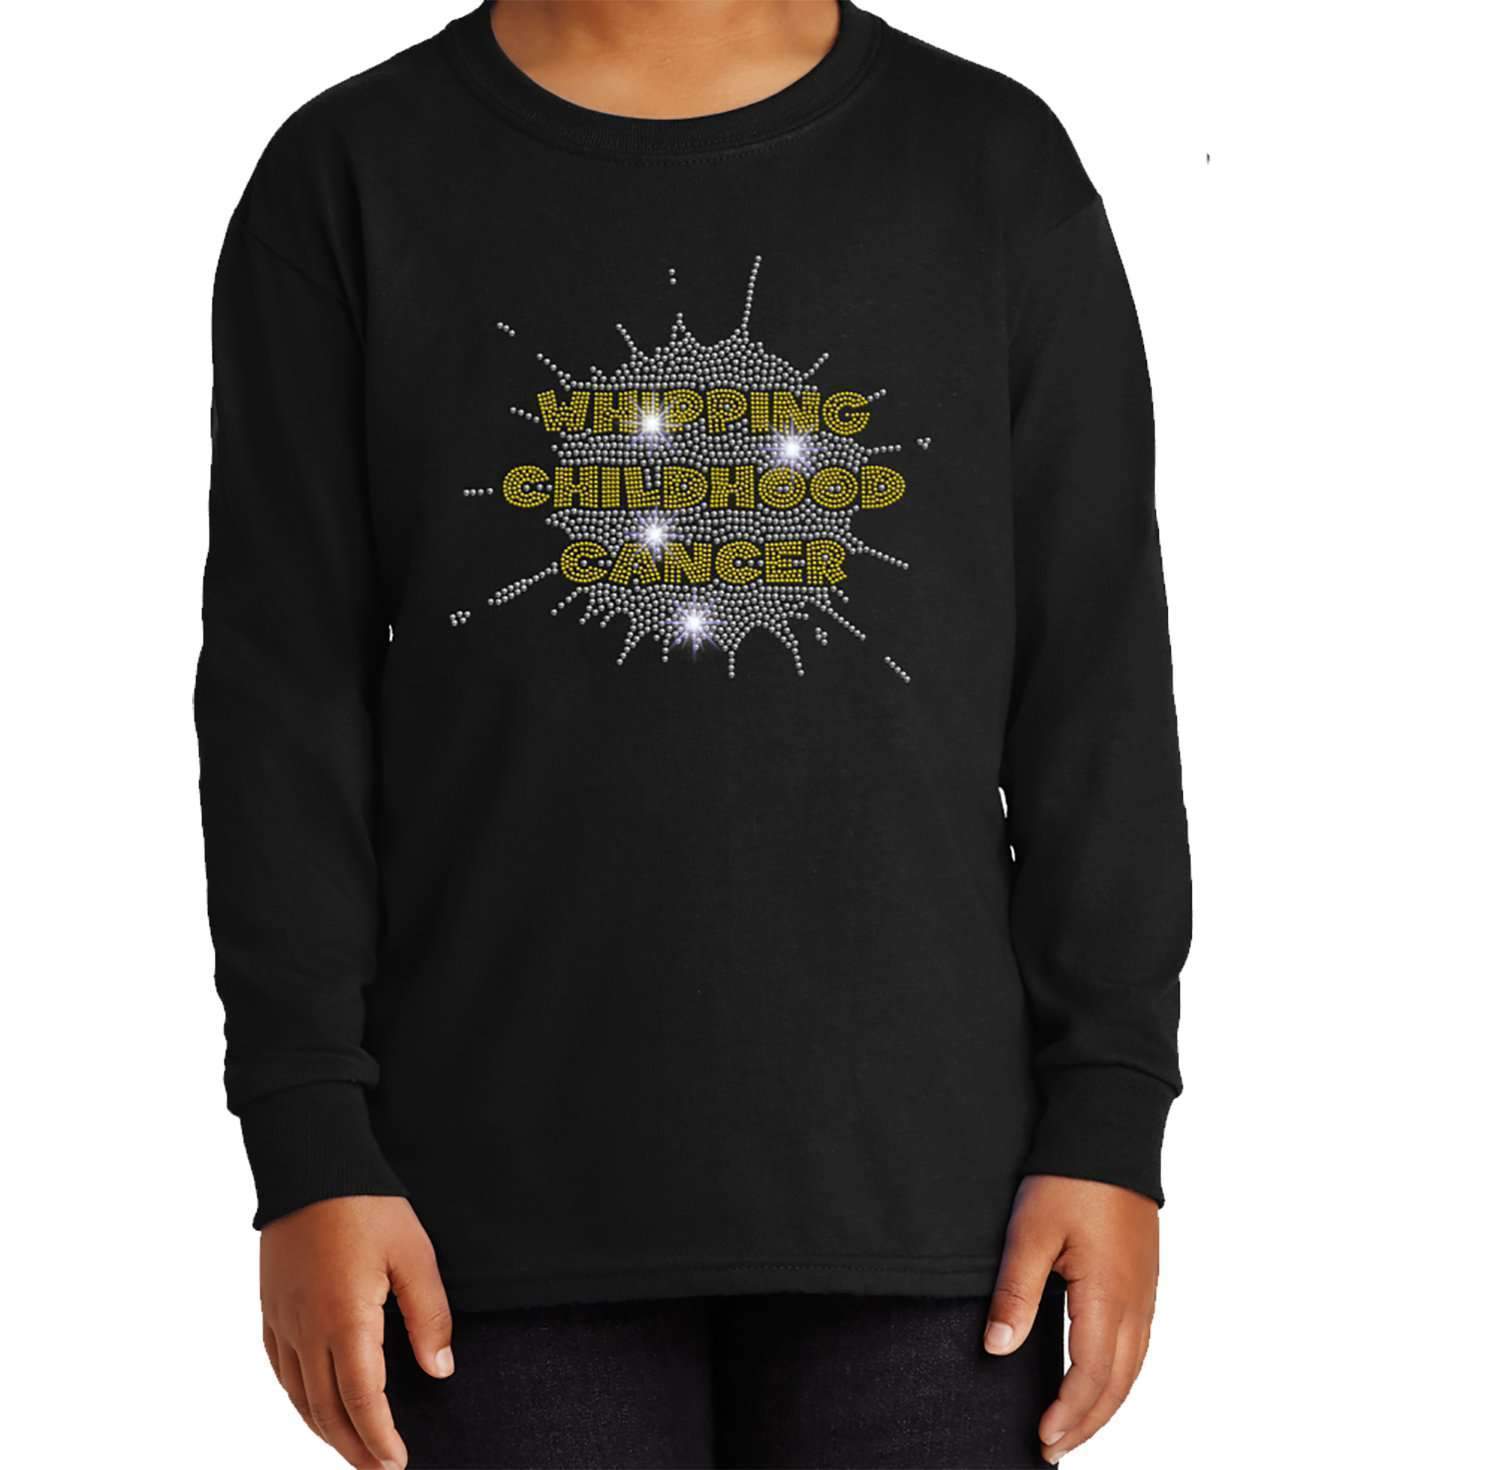 Whipping Childhood Cancer Spangle Rhinestone Bling Youth Crew Neck Sweatshirt VIEW ALL DESIGNS Becky's Boutique Youth Extra-Small Bling 